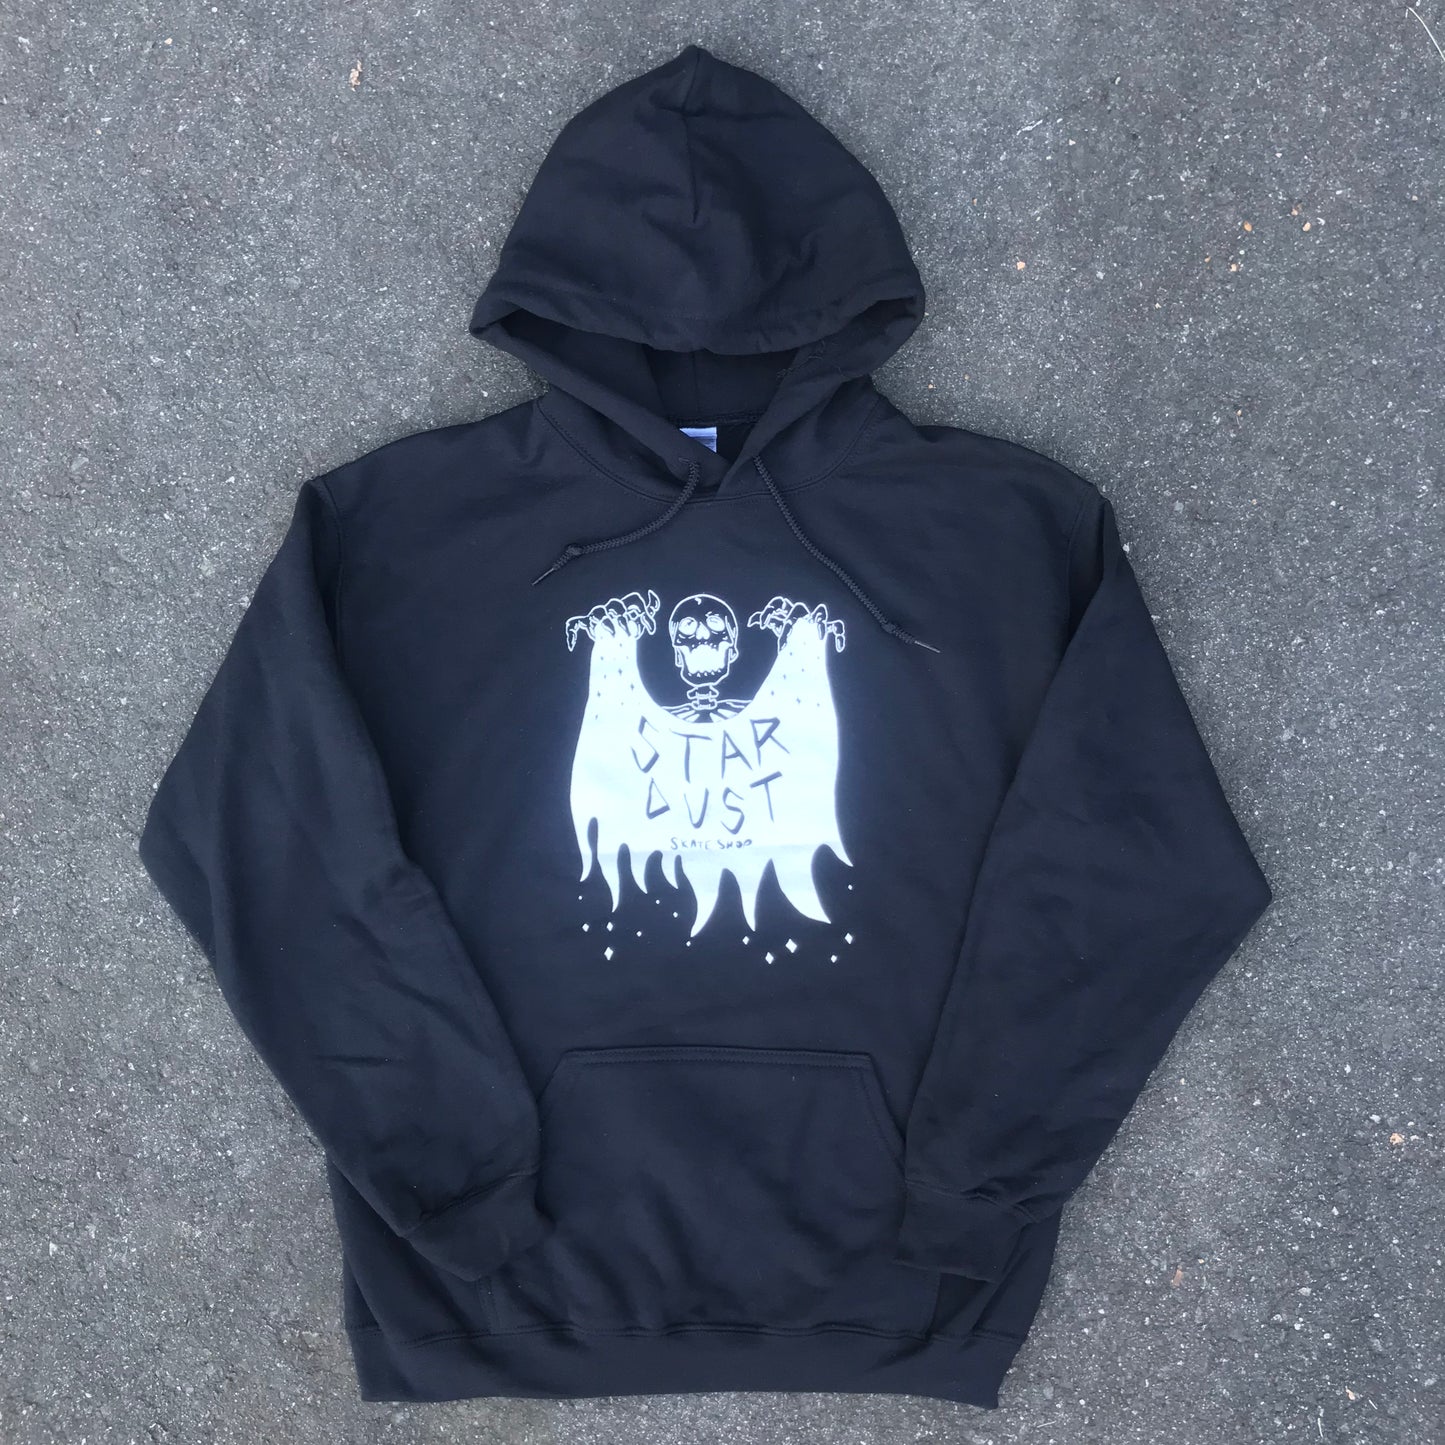 Stardust Skeleton Hoody 008 By Fred Smith Black / White